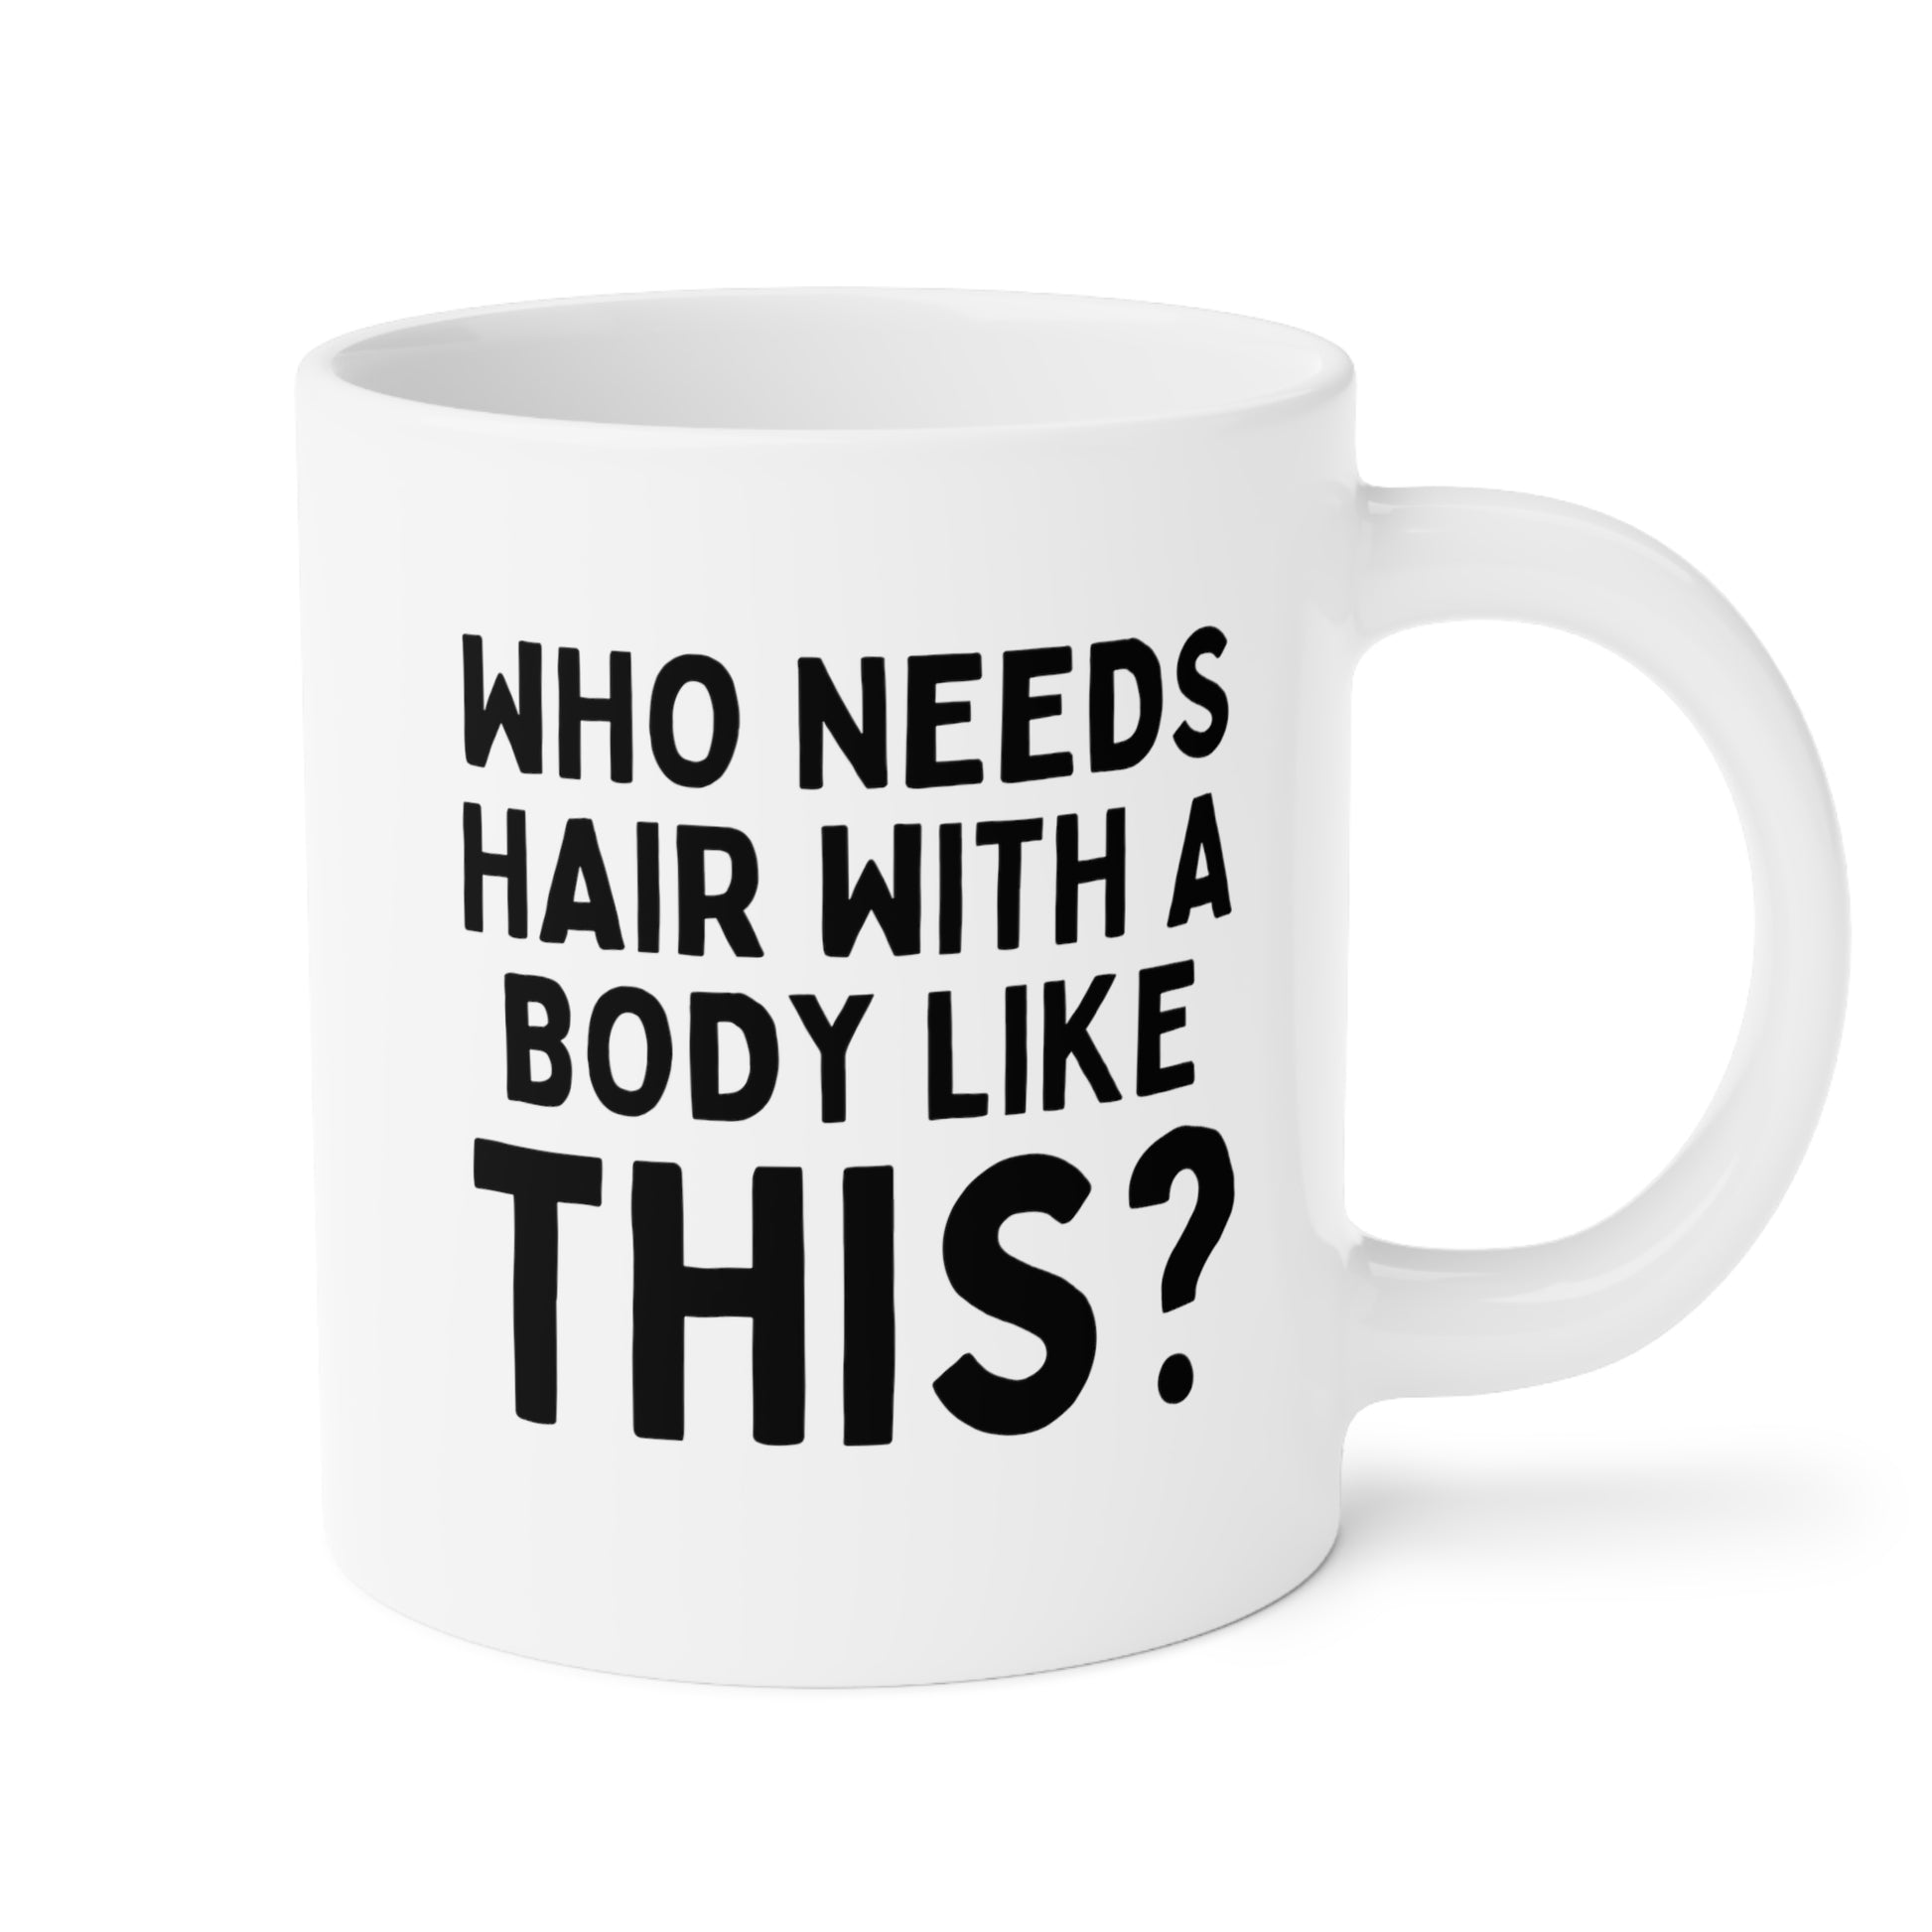 Who Needs Hair With a Body Like This 20oz white funny large coffee mug gift for bald men fathers day husband humor dad tea cup mens drinkware waveywares wavey wares wavywares wavy wares